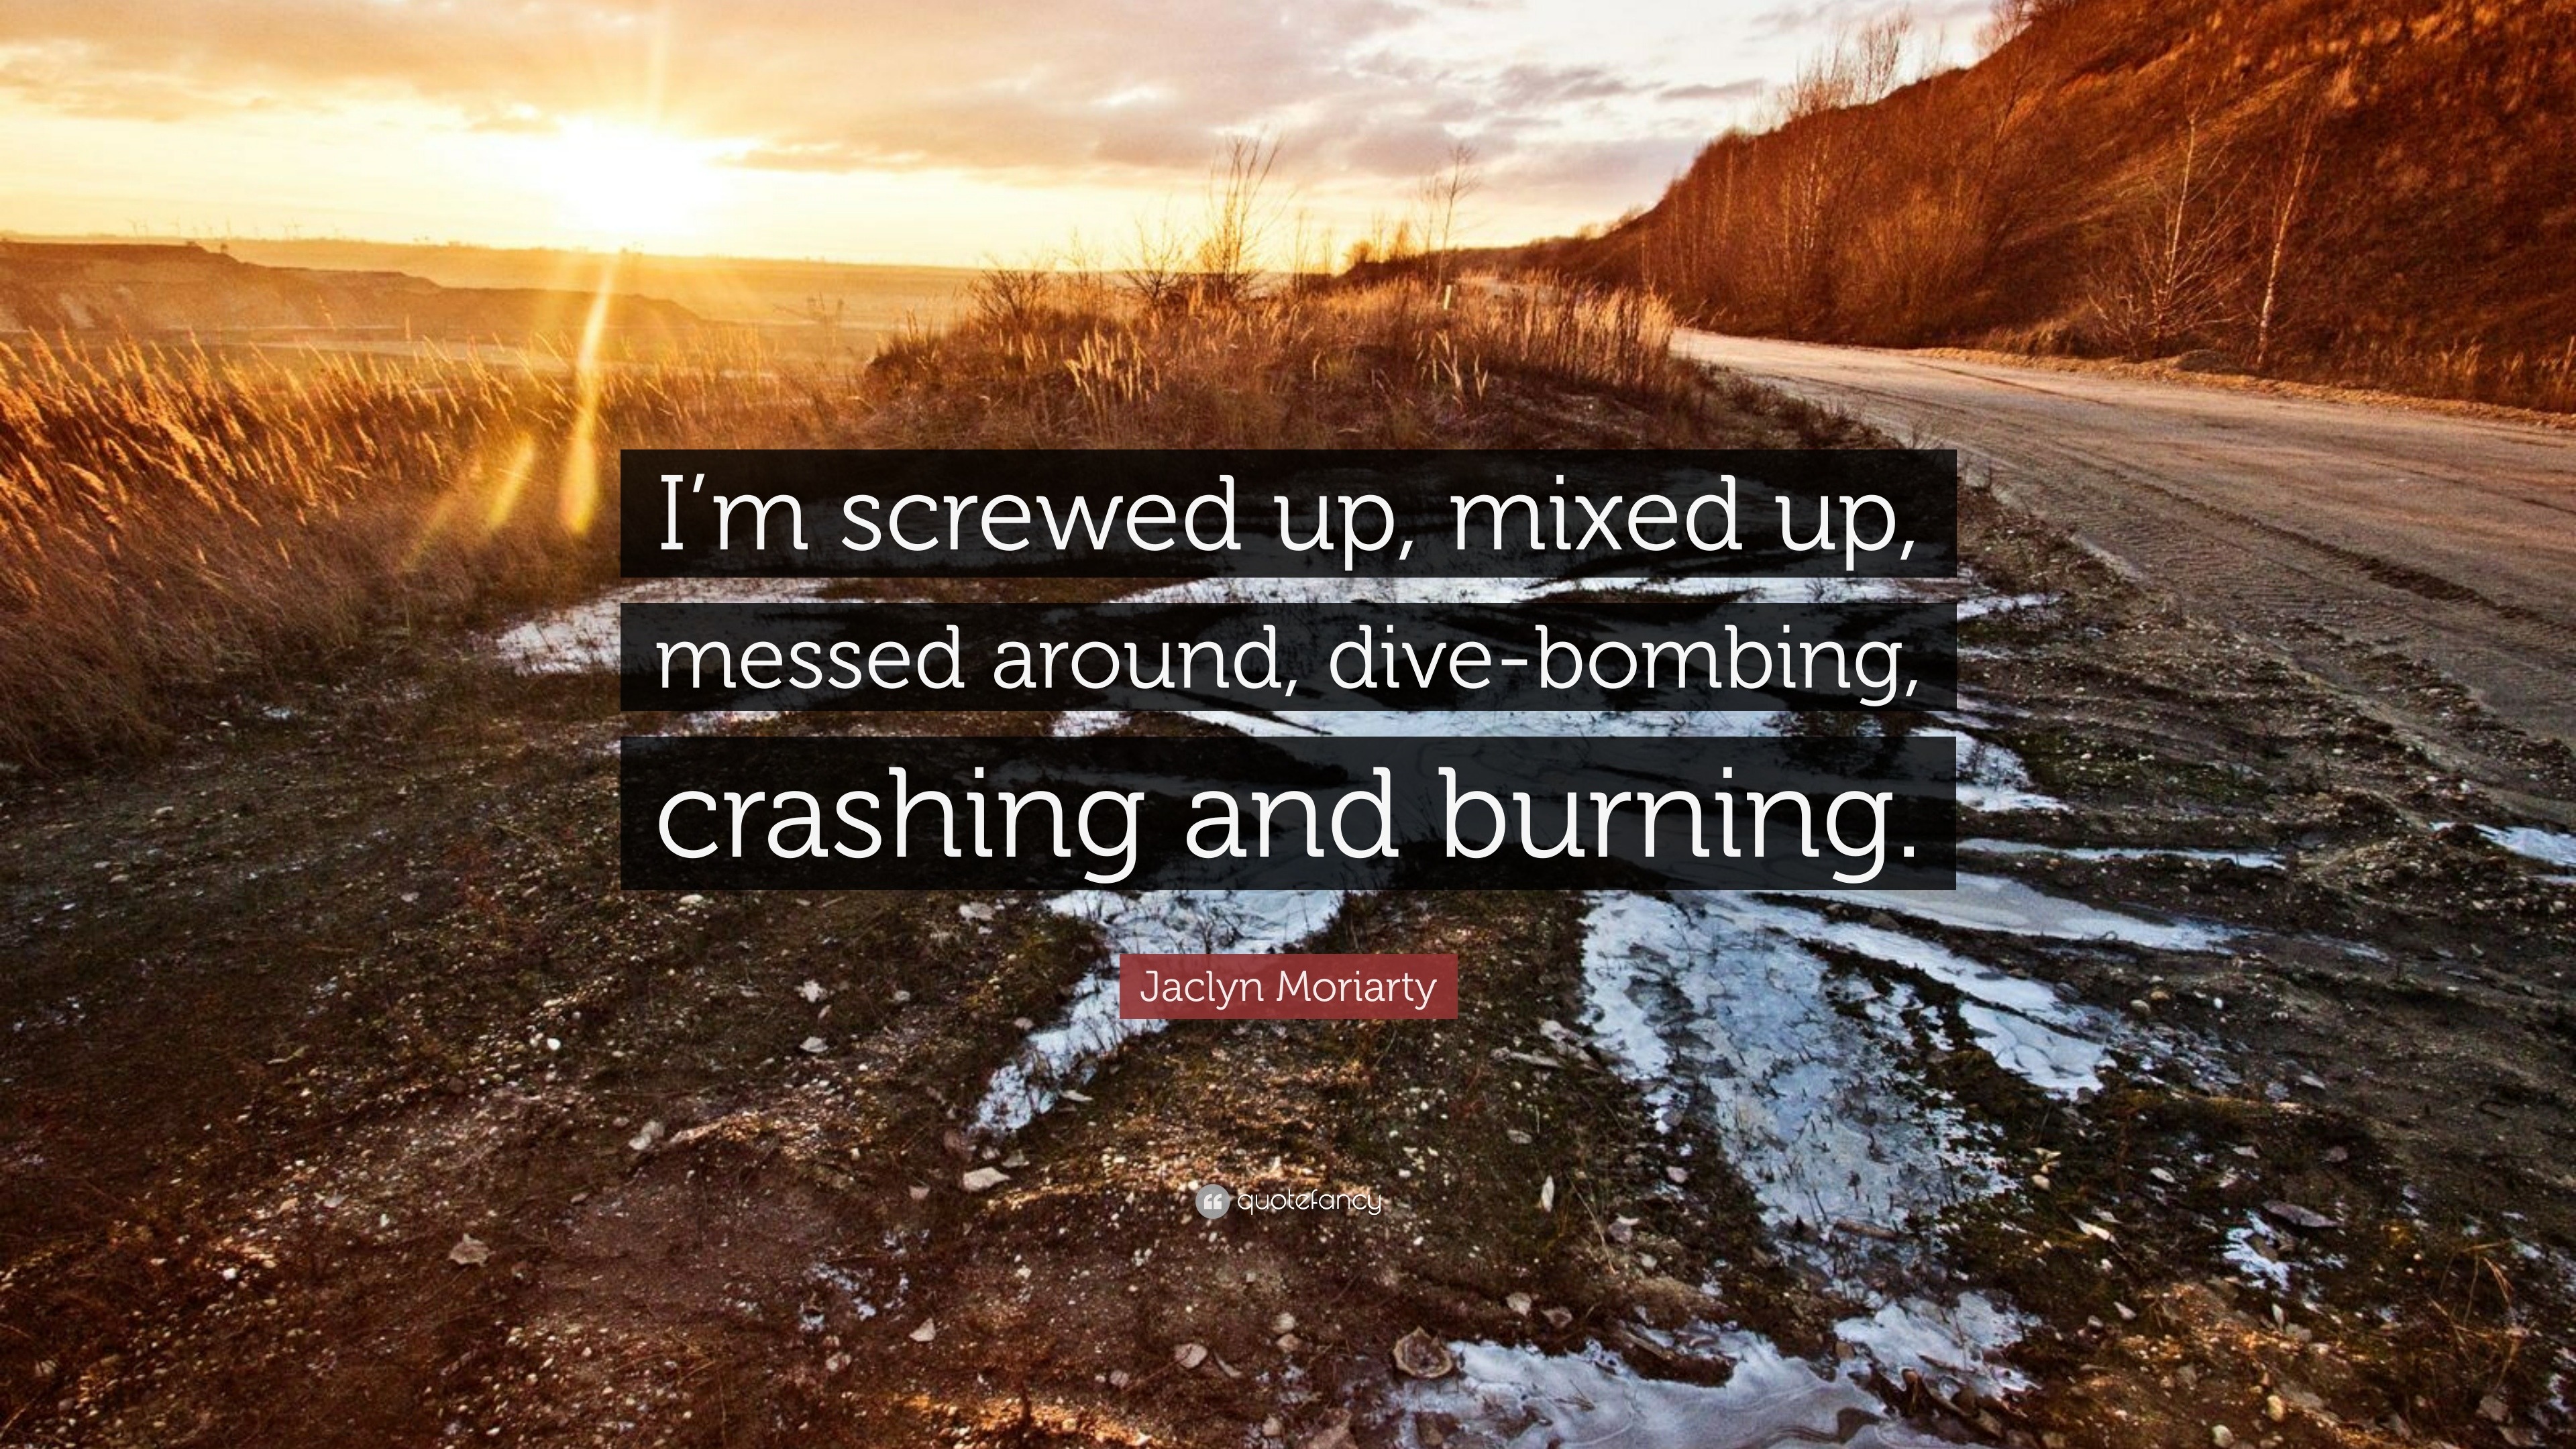 Jaclyn Moriarty Quote “Im screwed up, mixed up, messed around, dive-bombing, crashing and burning.” photo photo